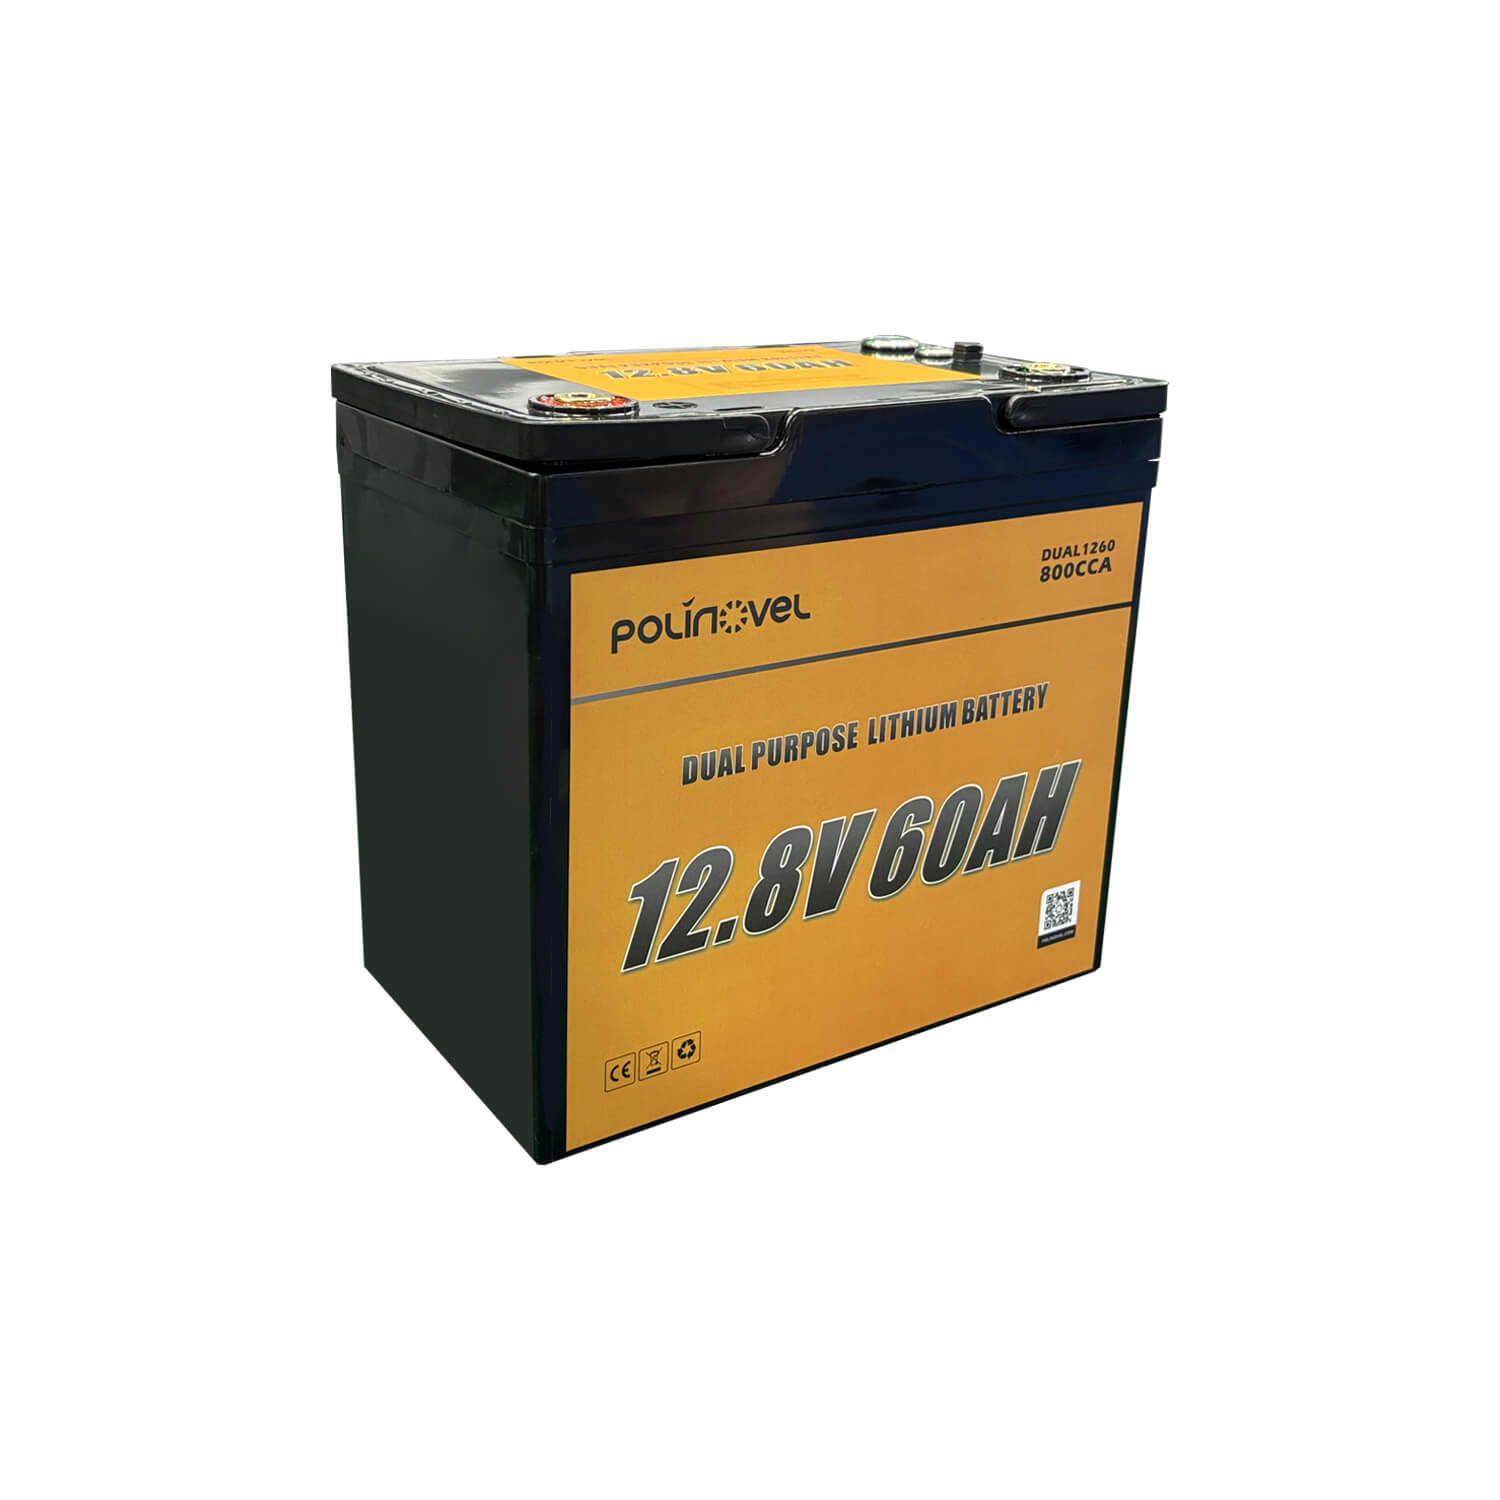 Polinovel 12V 60Ah Dual Purpose Lithium Battery with M8 Terminals